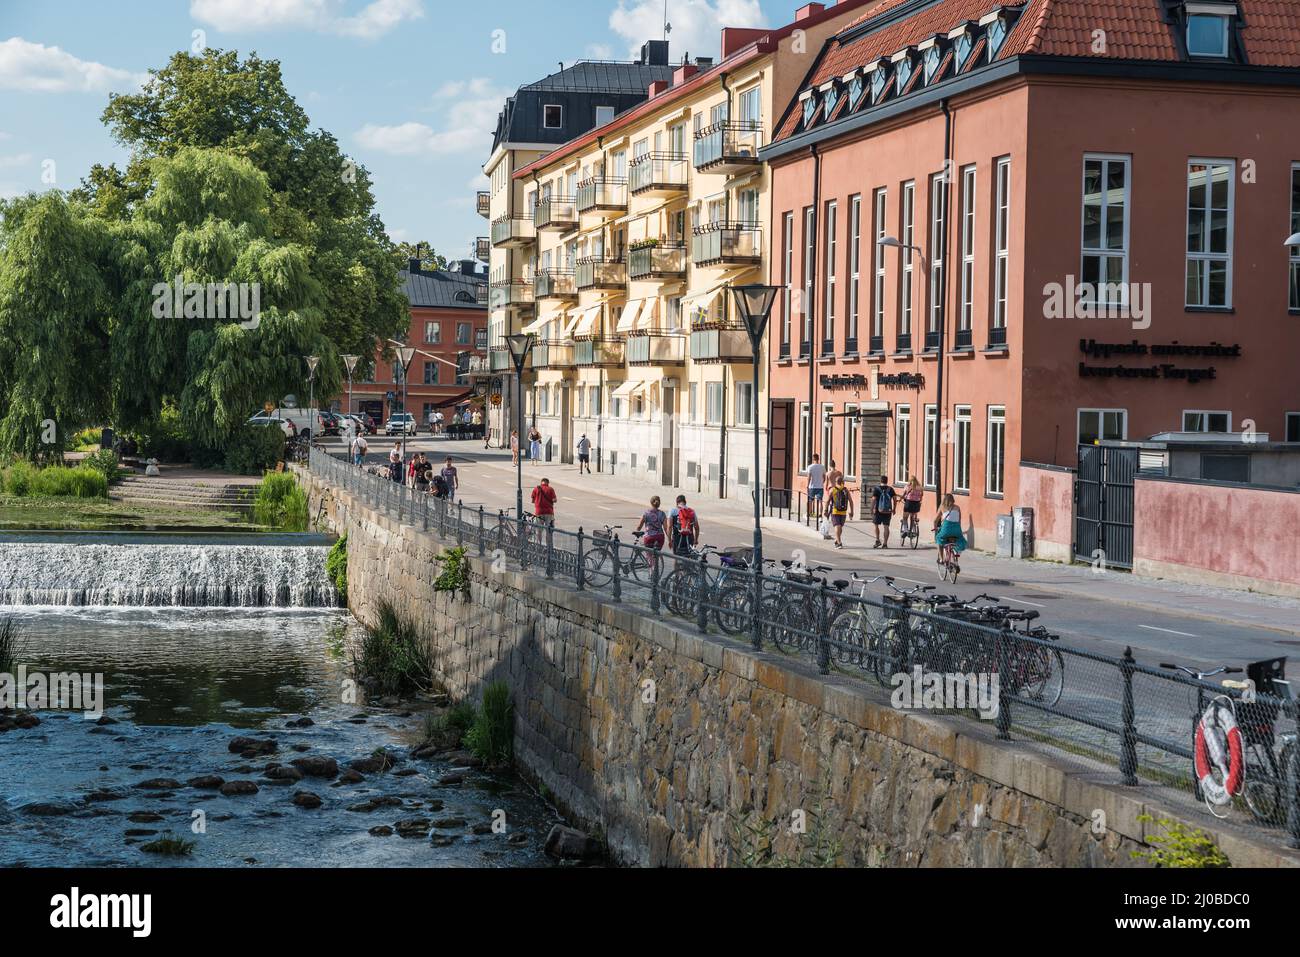 Uppsala, Uppland, Sweden - 07 27 2019 The facades and the banks around the river Stock Photo